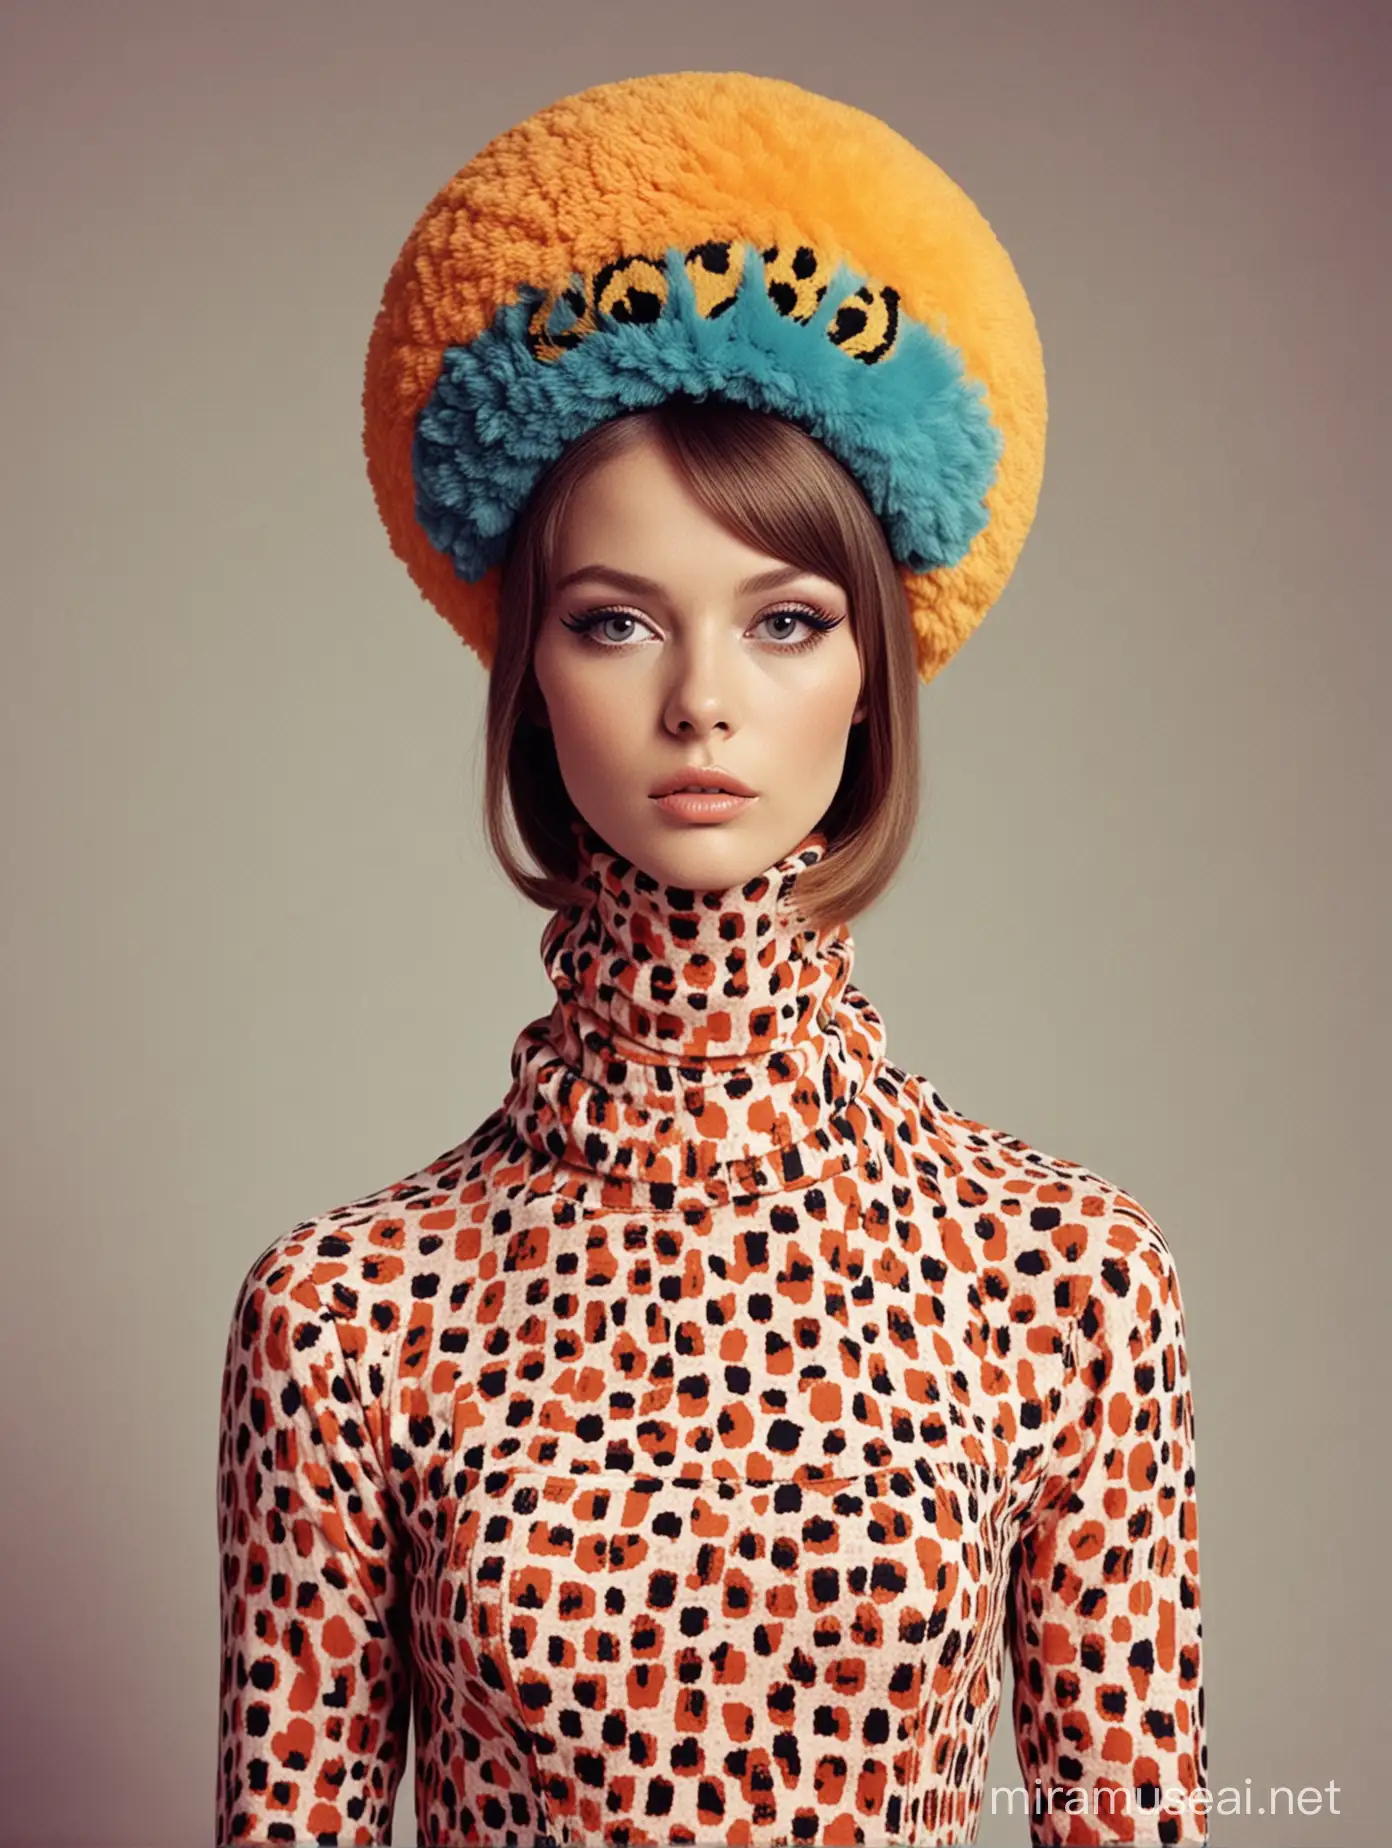 Vintage 60s Fashion Model in Surreal AnimalInspired Attire